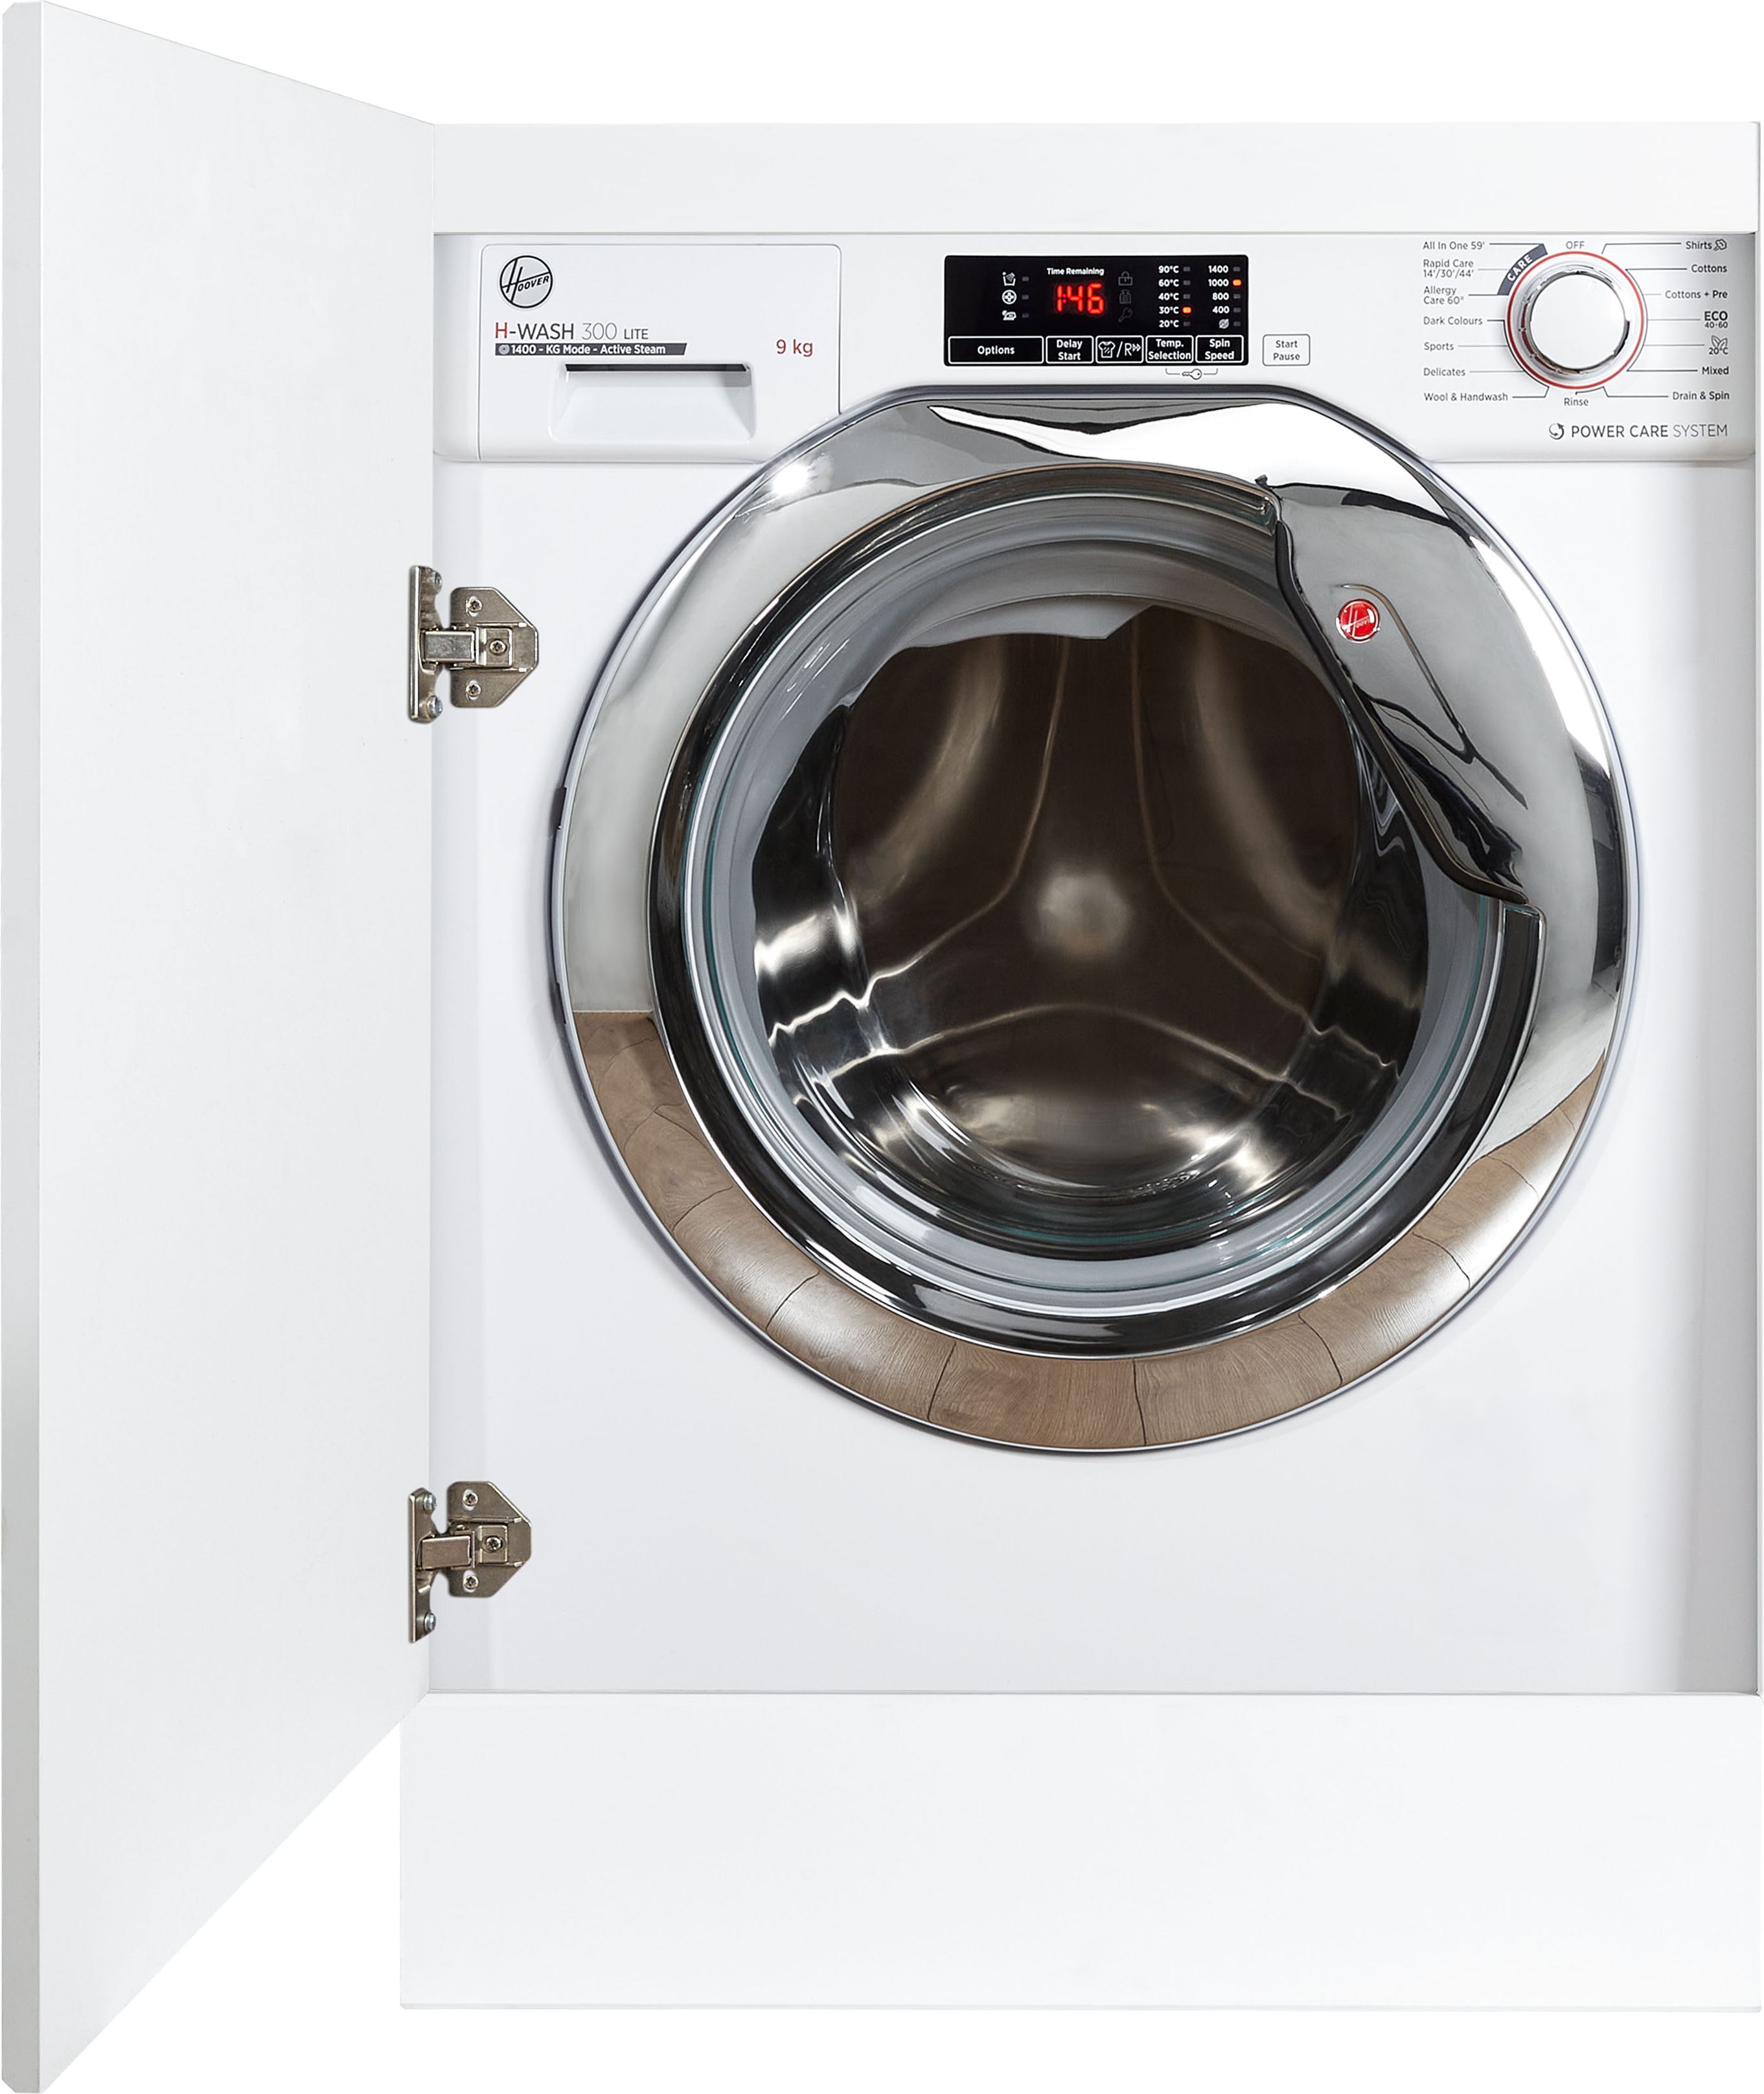 Hoover H-WASH 300 LITE HBWS49D1ACE Integrated 9kg Washing Machine with 1400 rpm - White / Chrome - C Rated, White